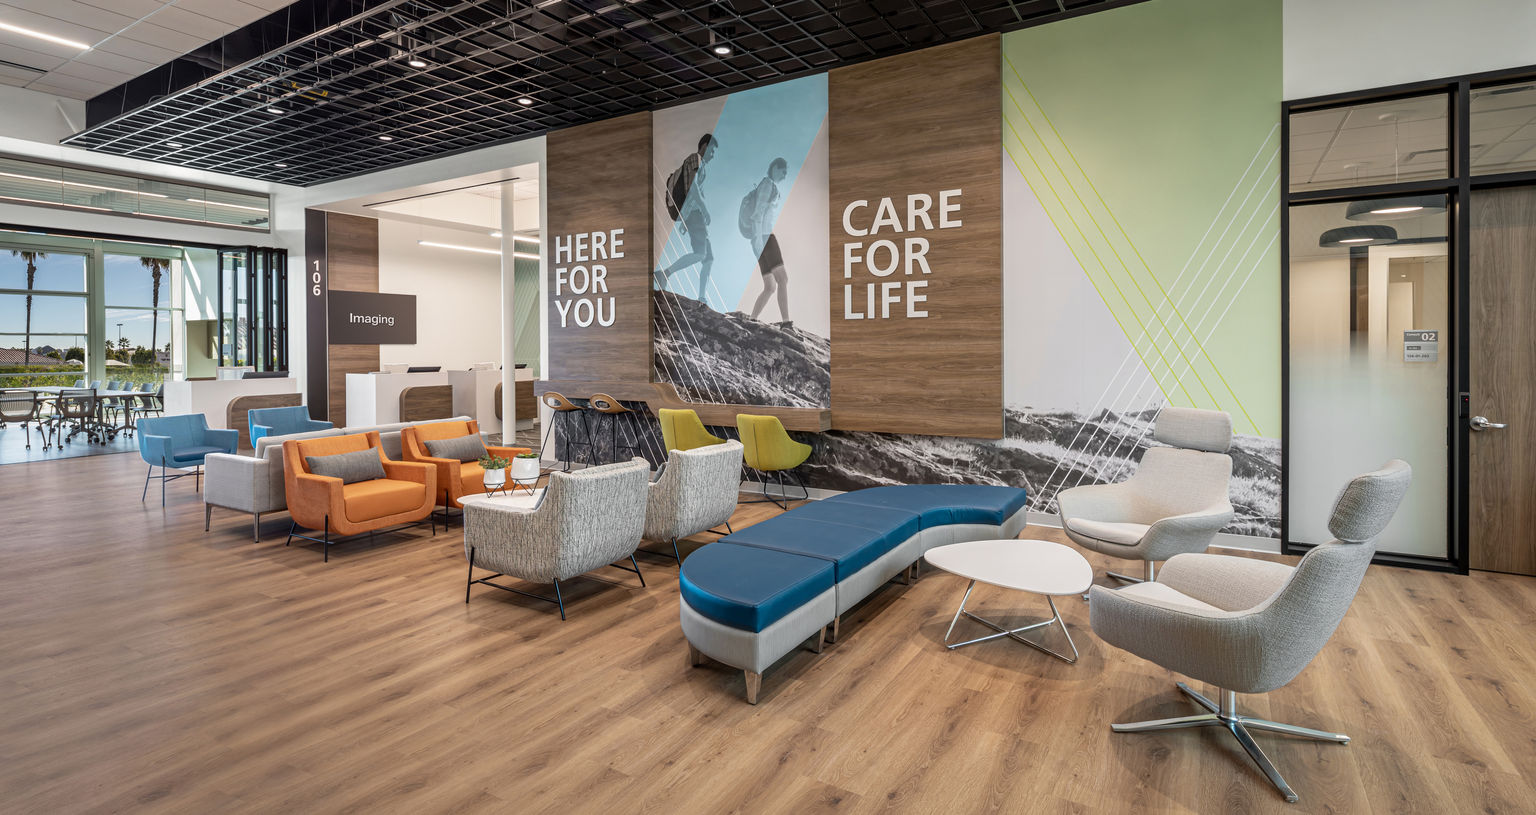 A contemporary hospitality-inspired healthcare lobby design with experiential graphics and signage. Custom wallcovering features features scenes of active hikers in local terrain.